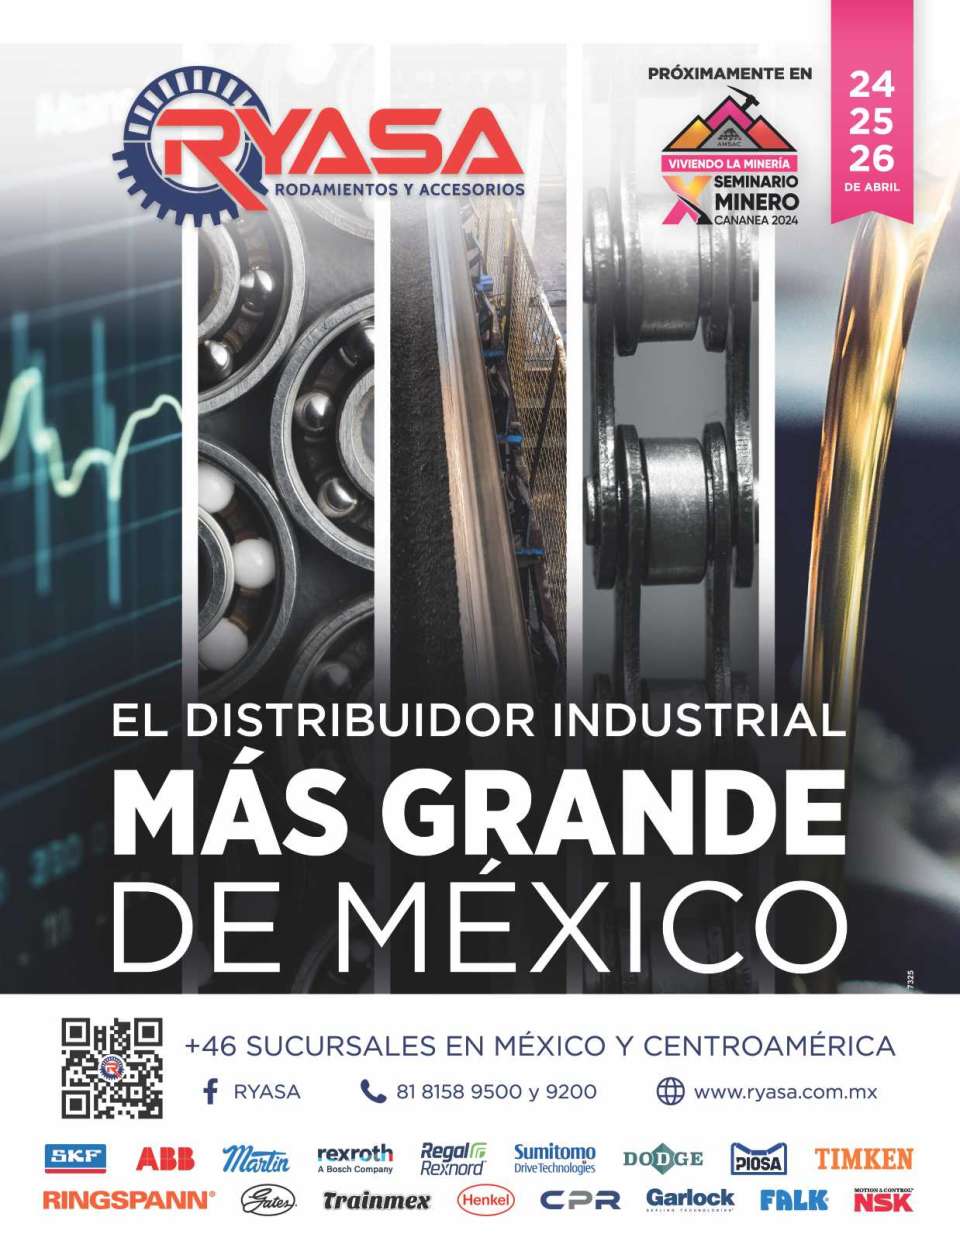 Distribution and Marketing of Bearings, Bands, Seals, Motors, Reducers, Bearing Units, Chains, Couplings, Sprockets, Conveyors, Lubrication Systems. Branches Mexico y Centroamerica